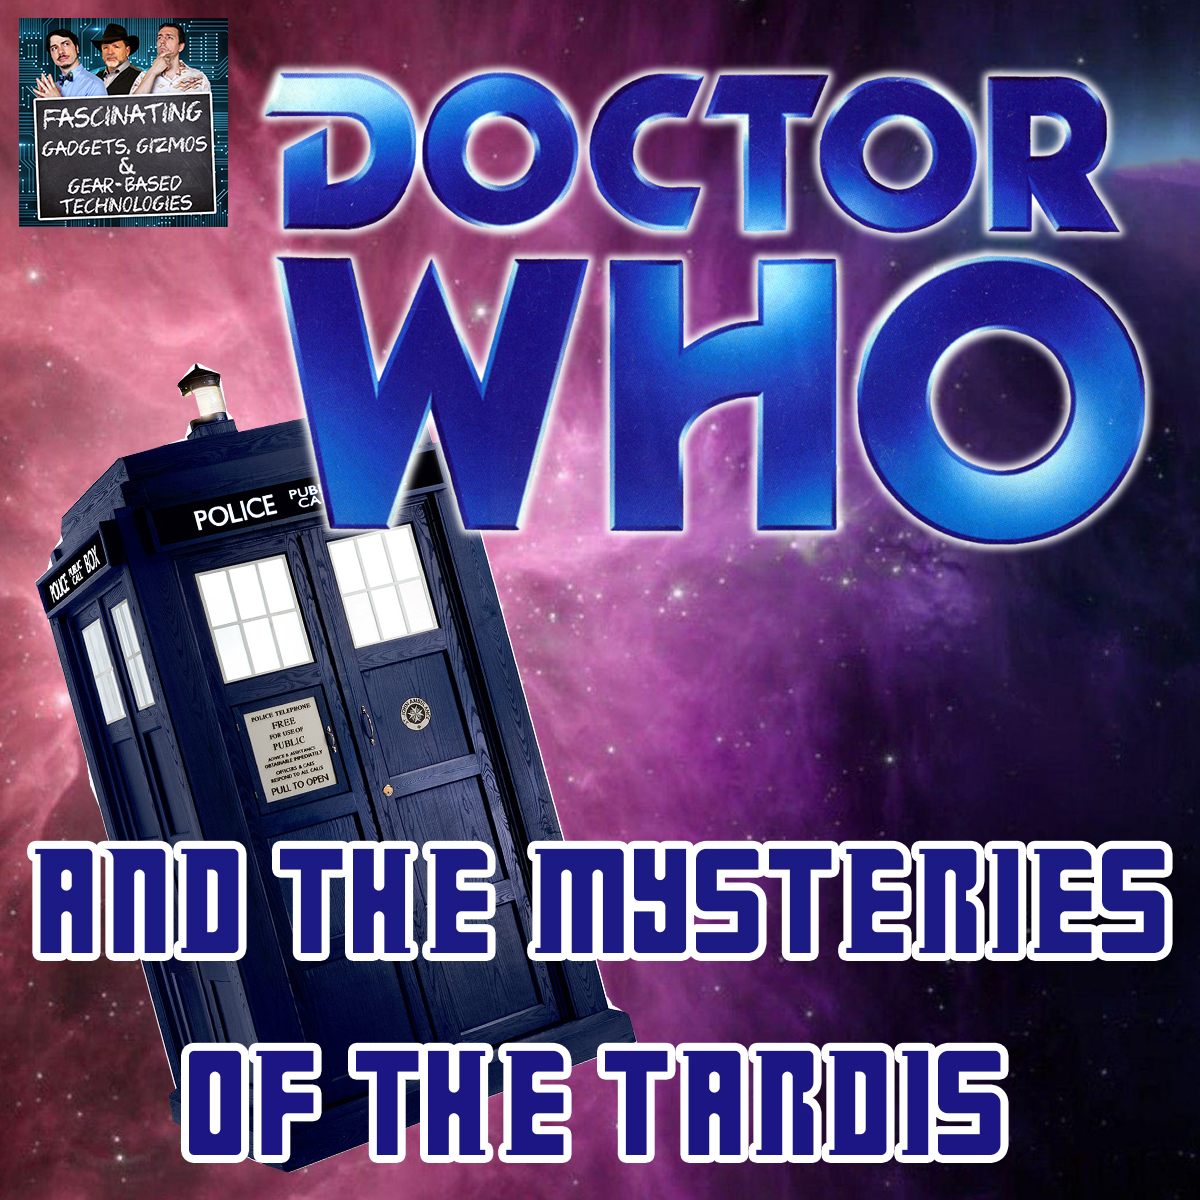 You are currently viewing Ep. 113 Doctor Who & The Mysteries of the TARDIS